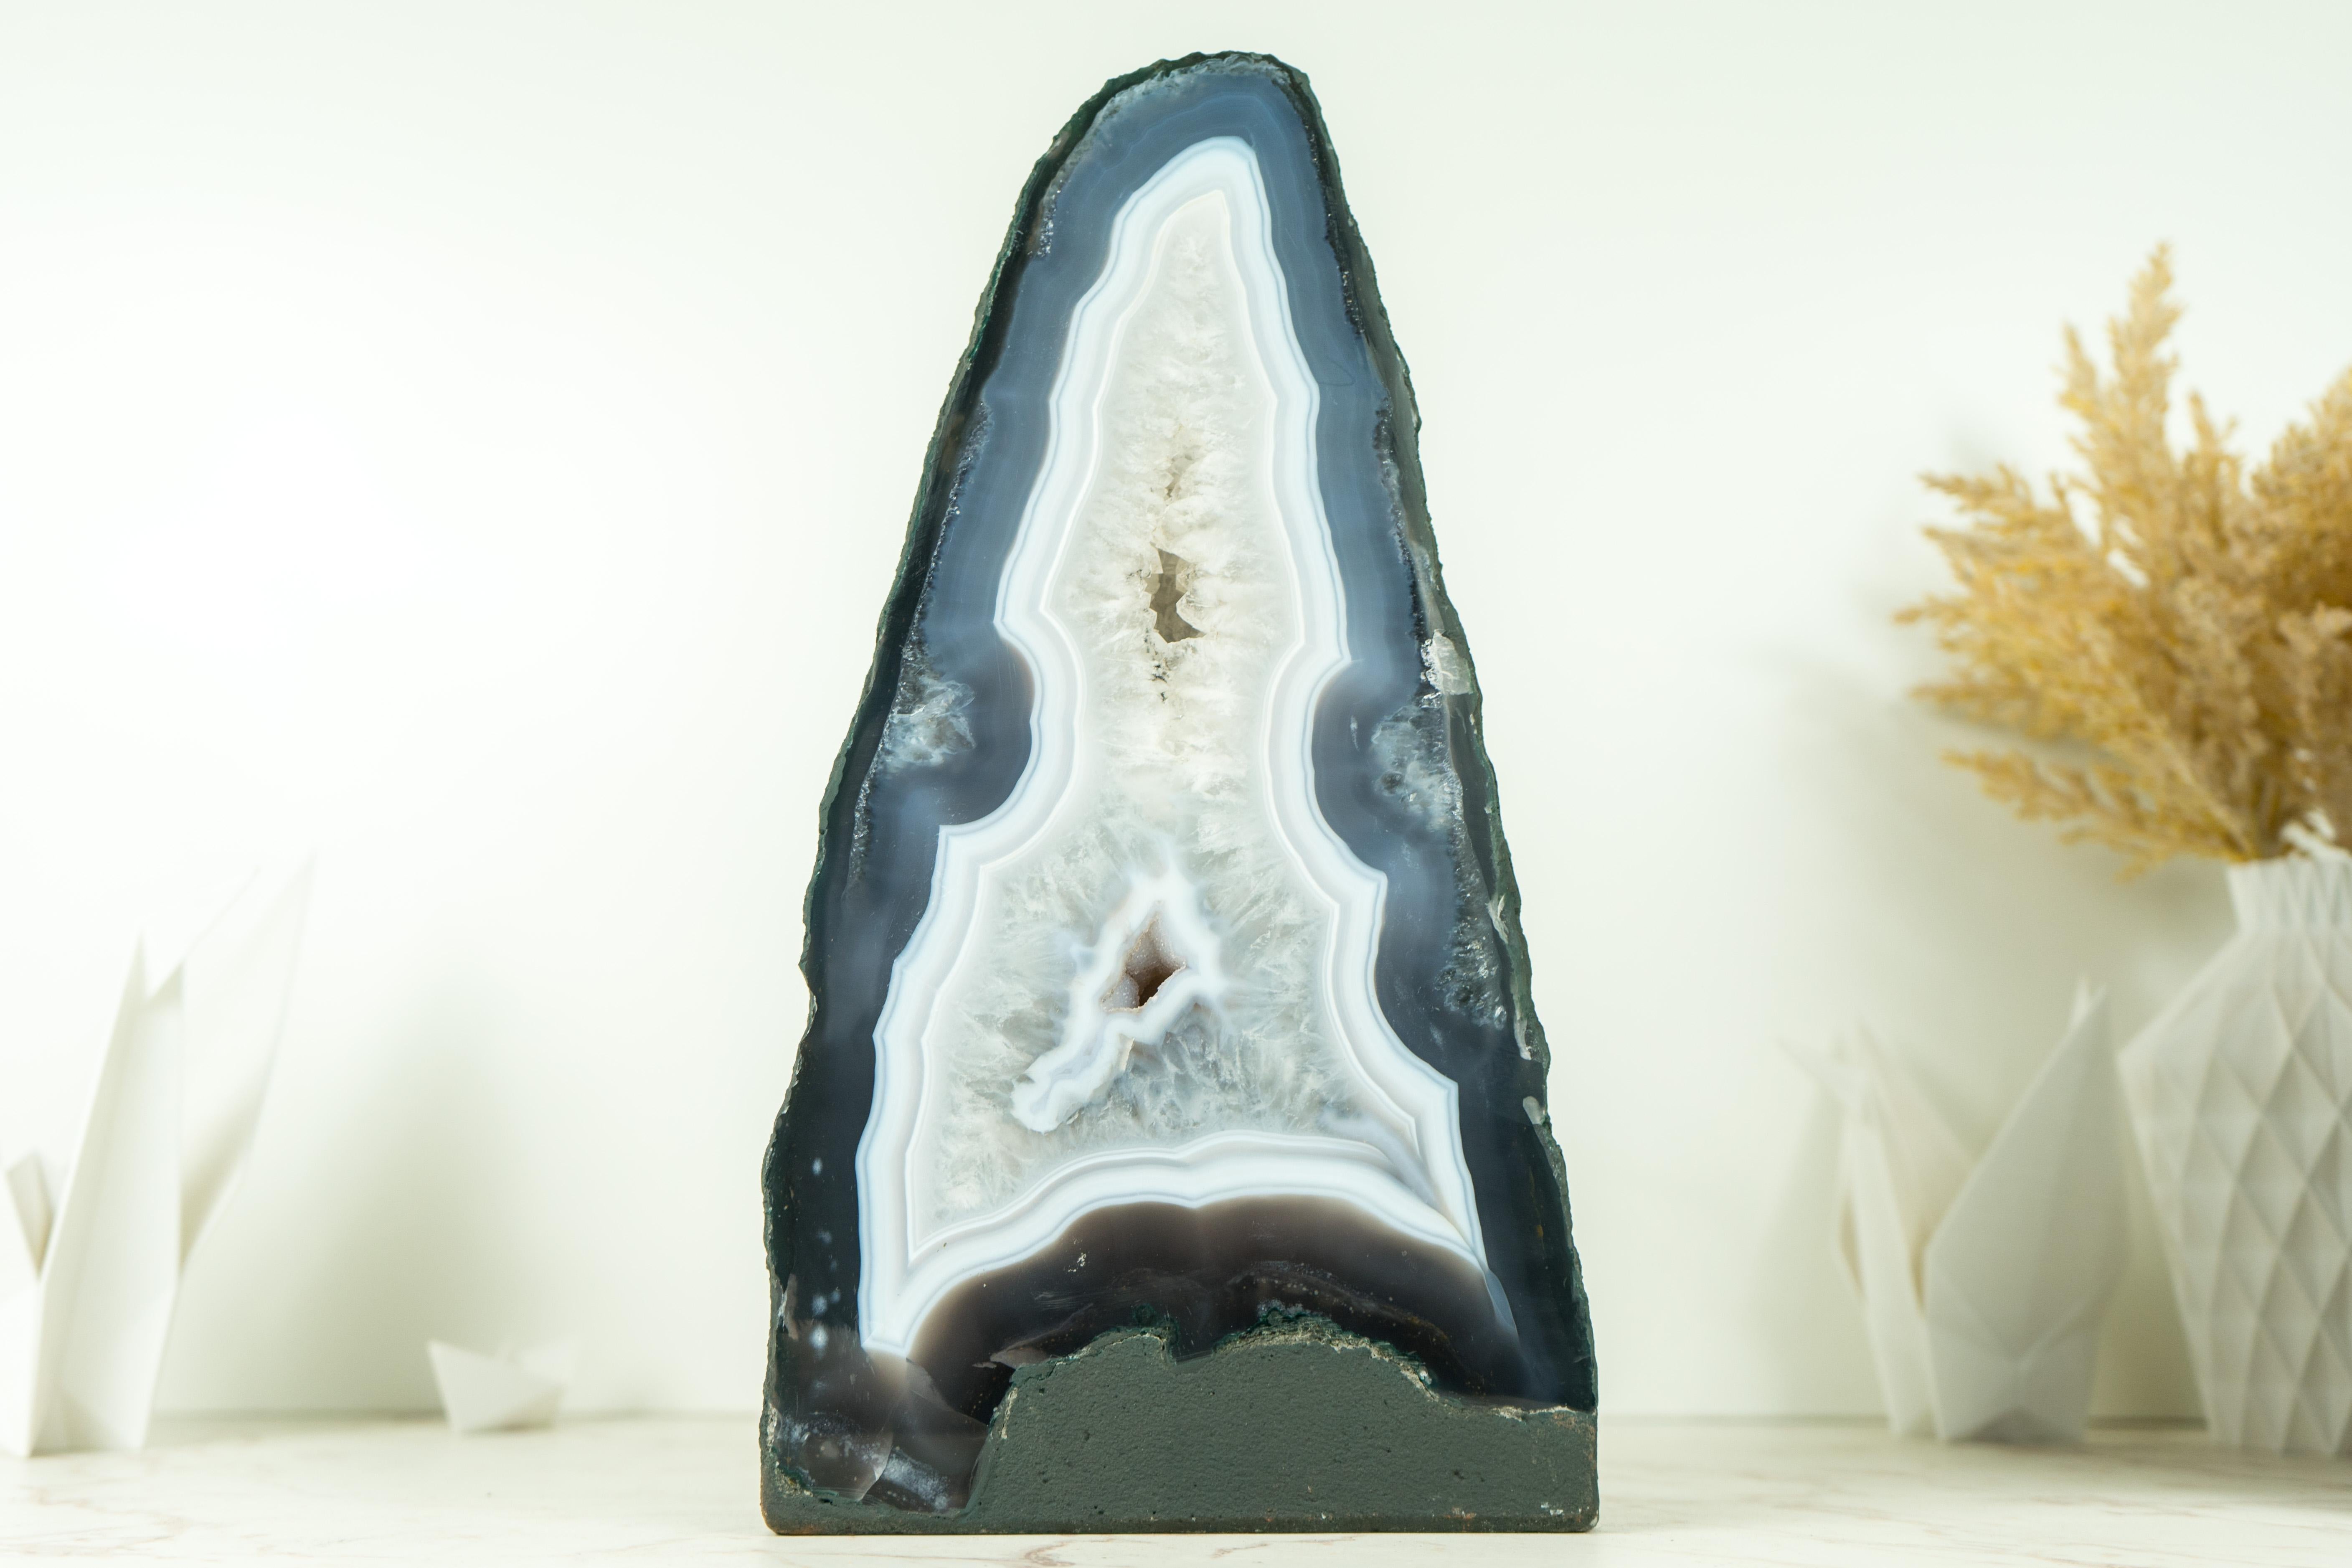 A gorgeous, intact agate with blue and white laces, this agate geode is considered to be of super-extra quality due to its beauty, formation, and the aesthetical agate bands that surround the entire geode. An outstanding agate, this geode is sure to